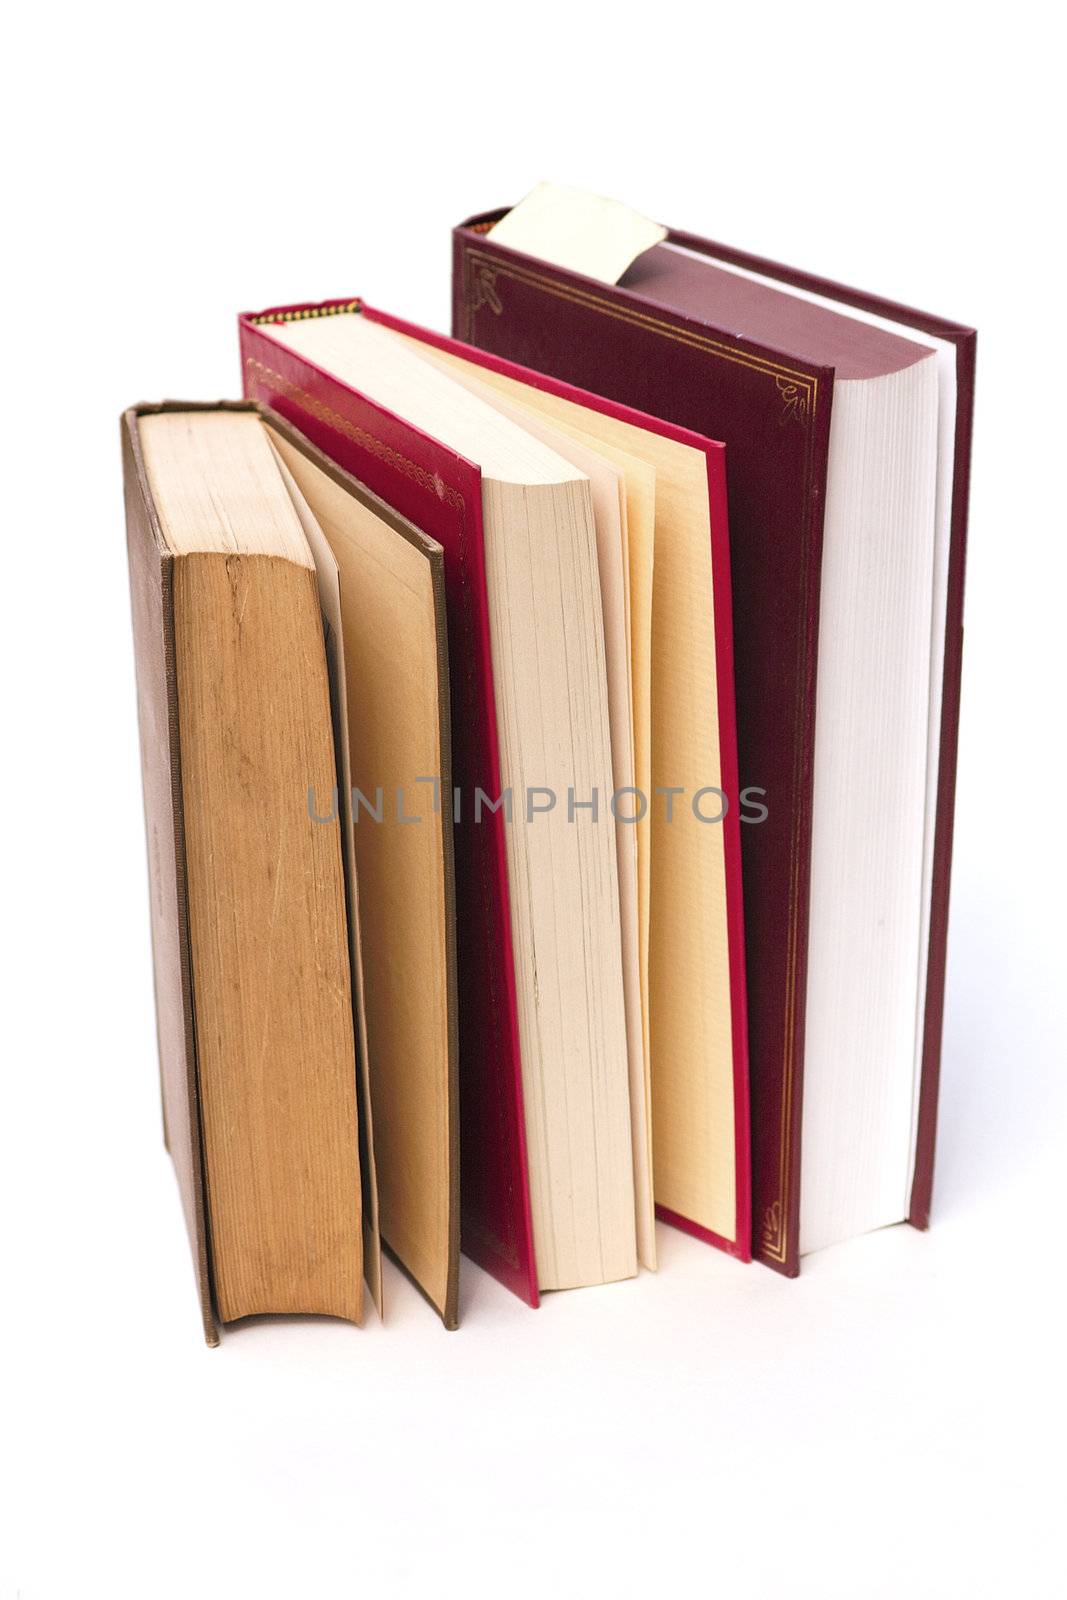 three books standing slighty open against a outside view